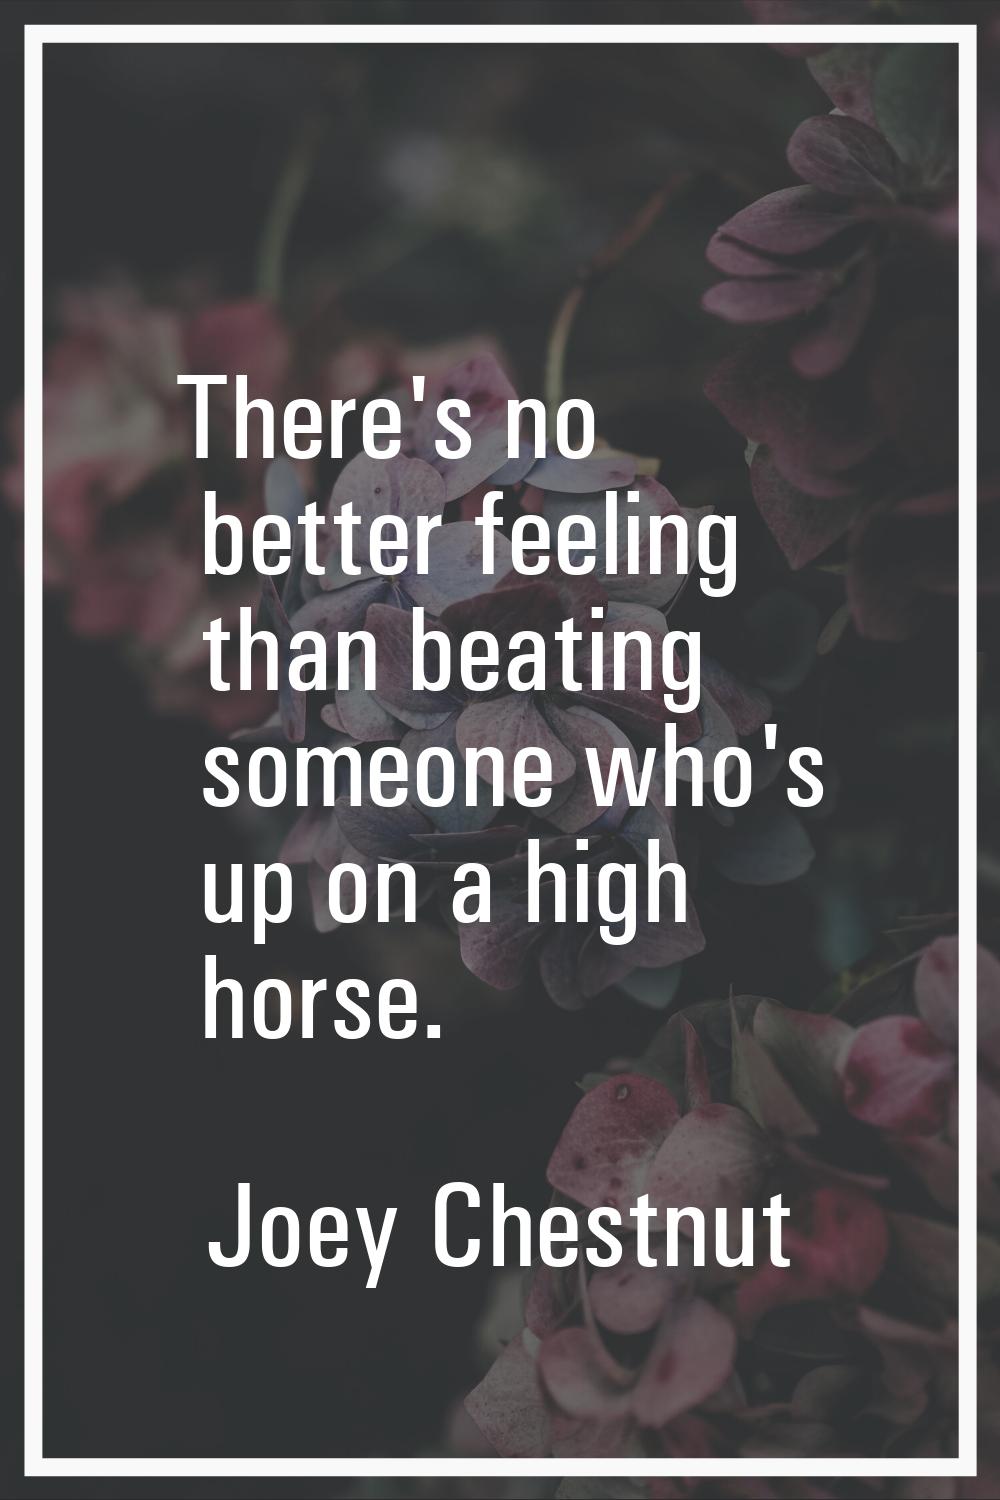 There's no better feeling than beating someone who's up on a high horse.